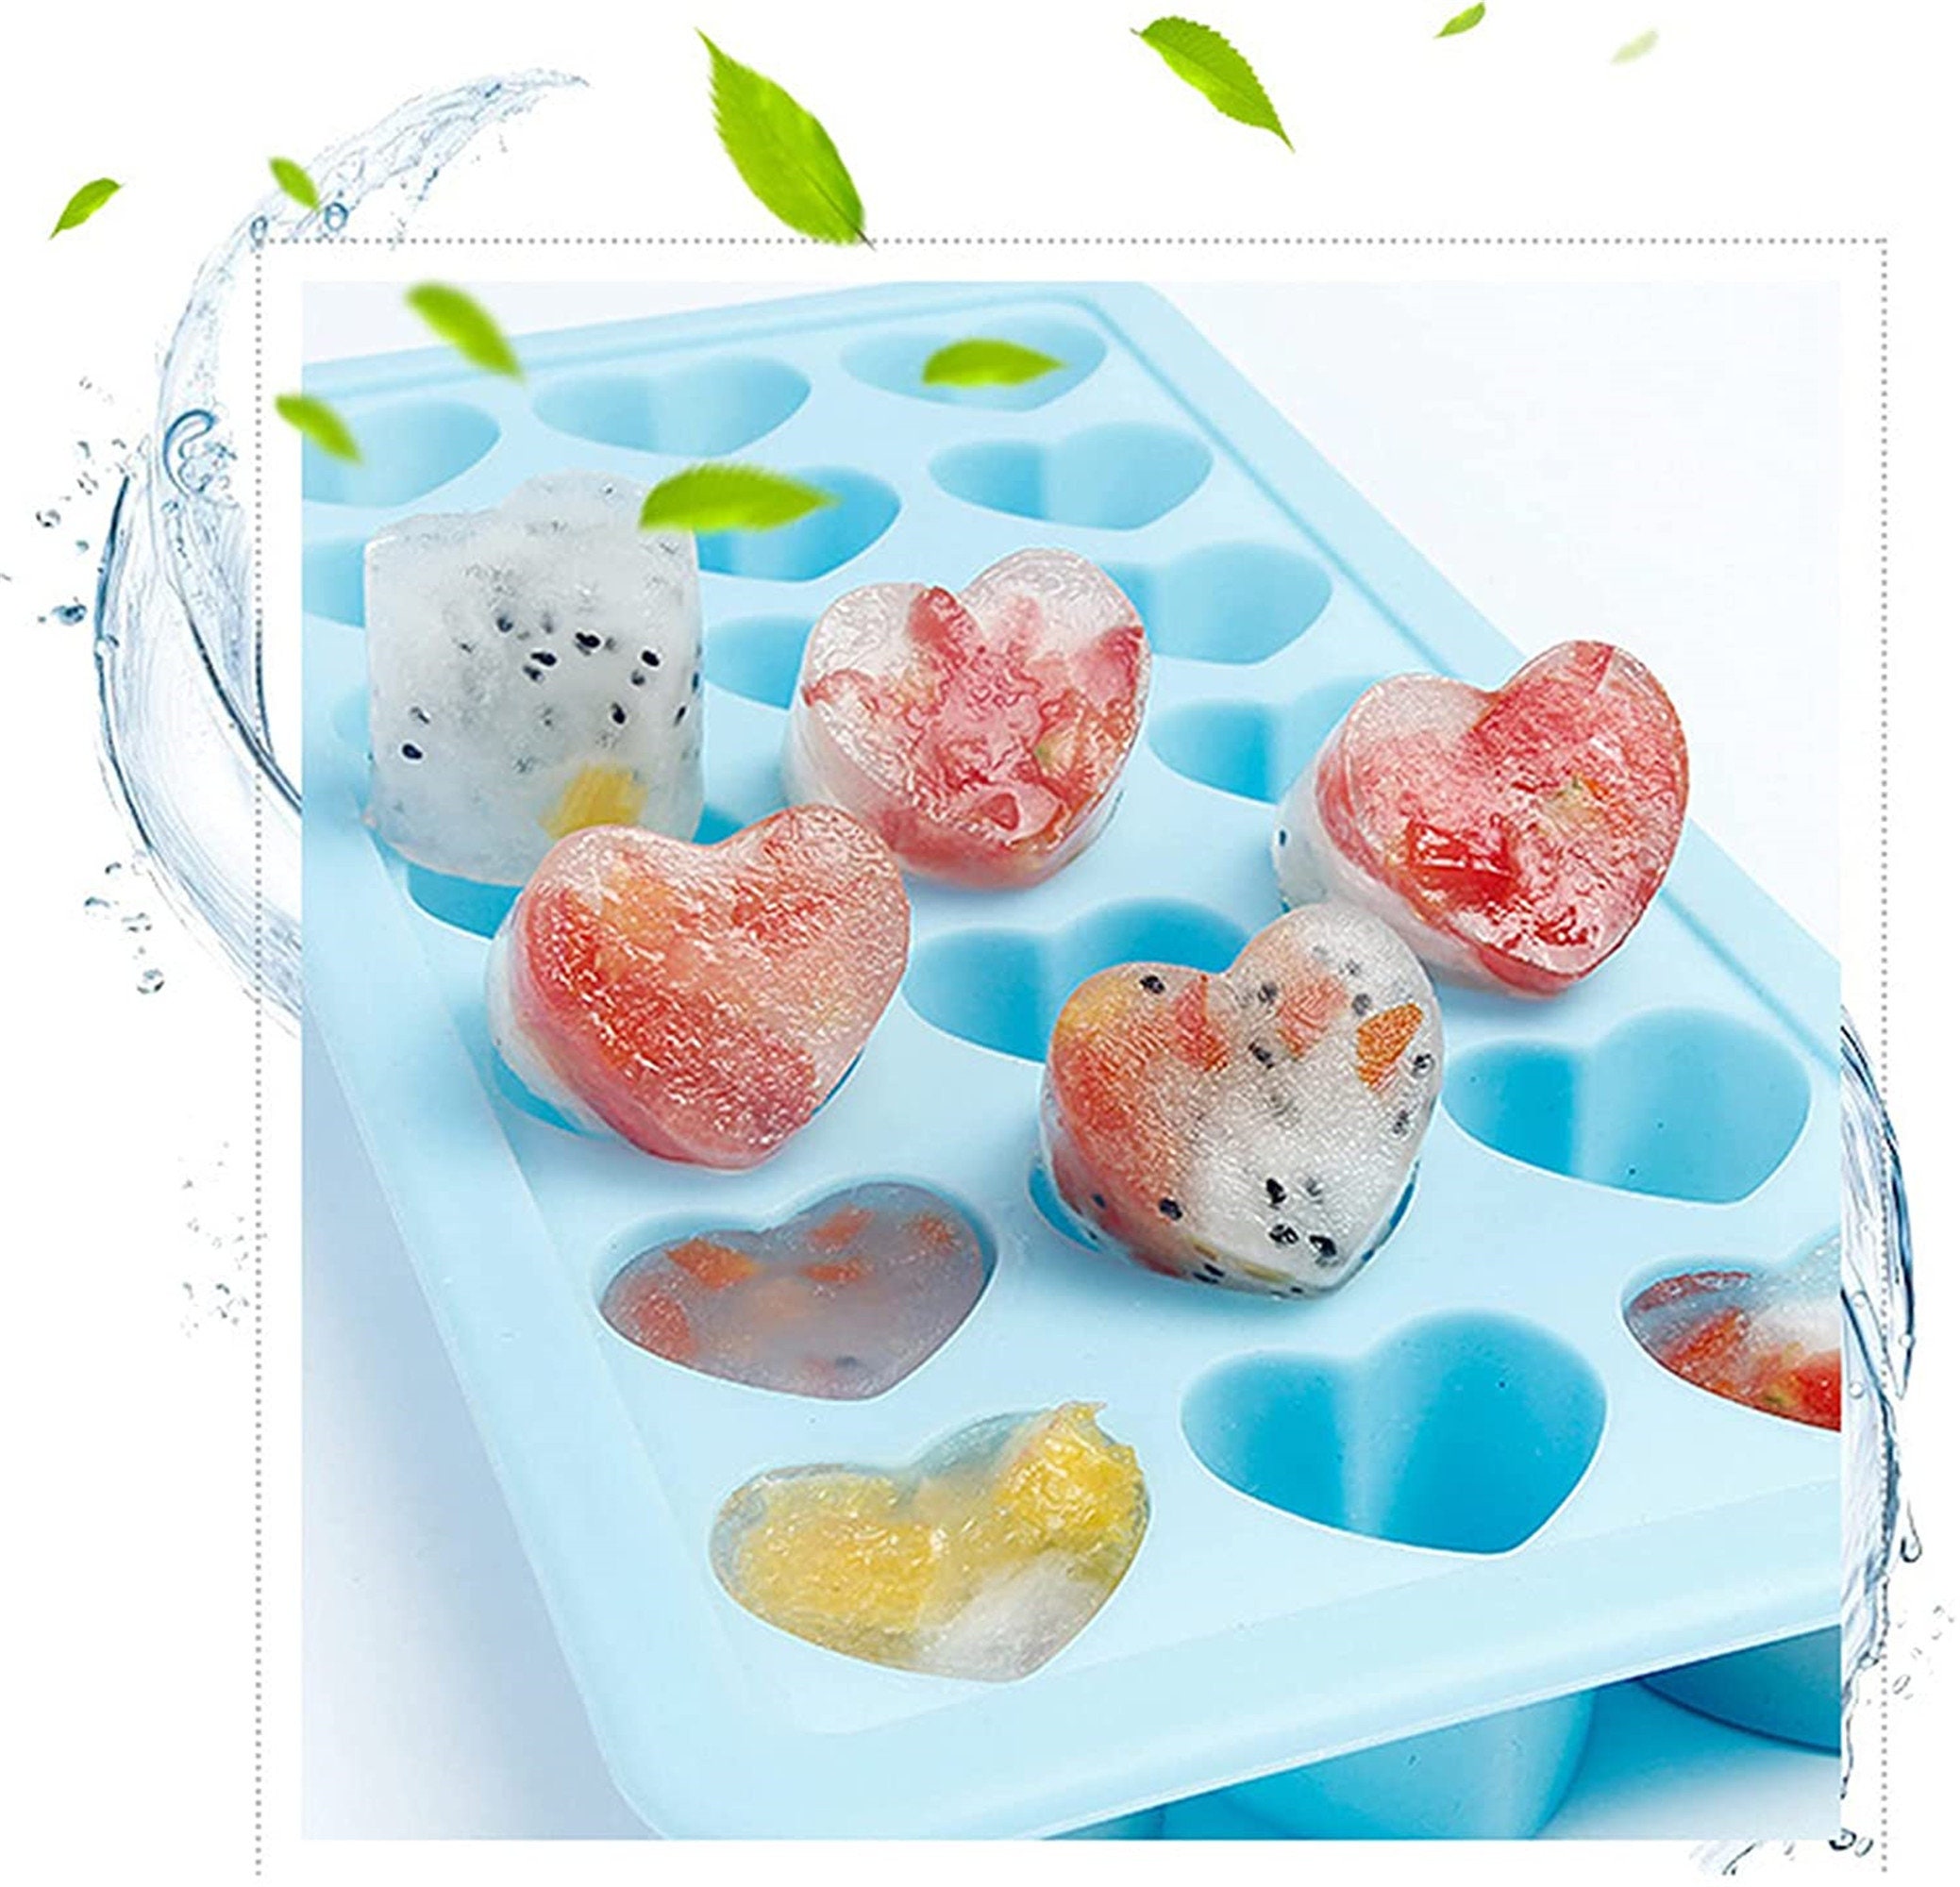 Vikakiooze Star shaped ice cube tray, fun ice cube tray for making heart  shaped ice cubes, ice cube molds that are easy to demould